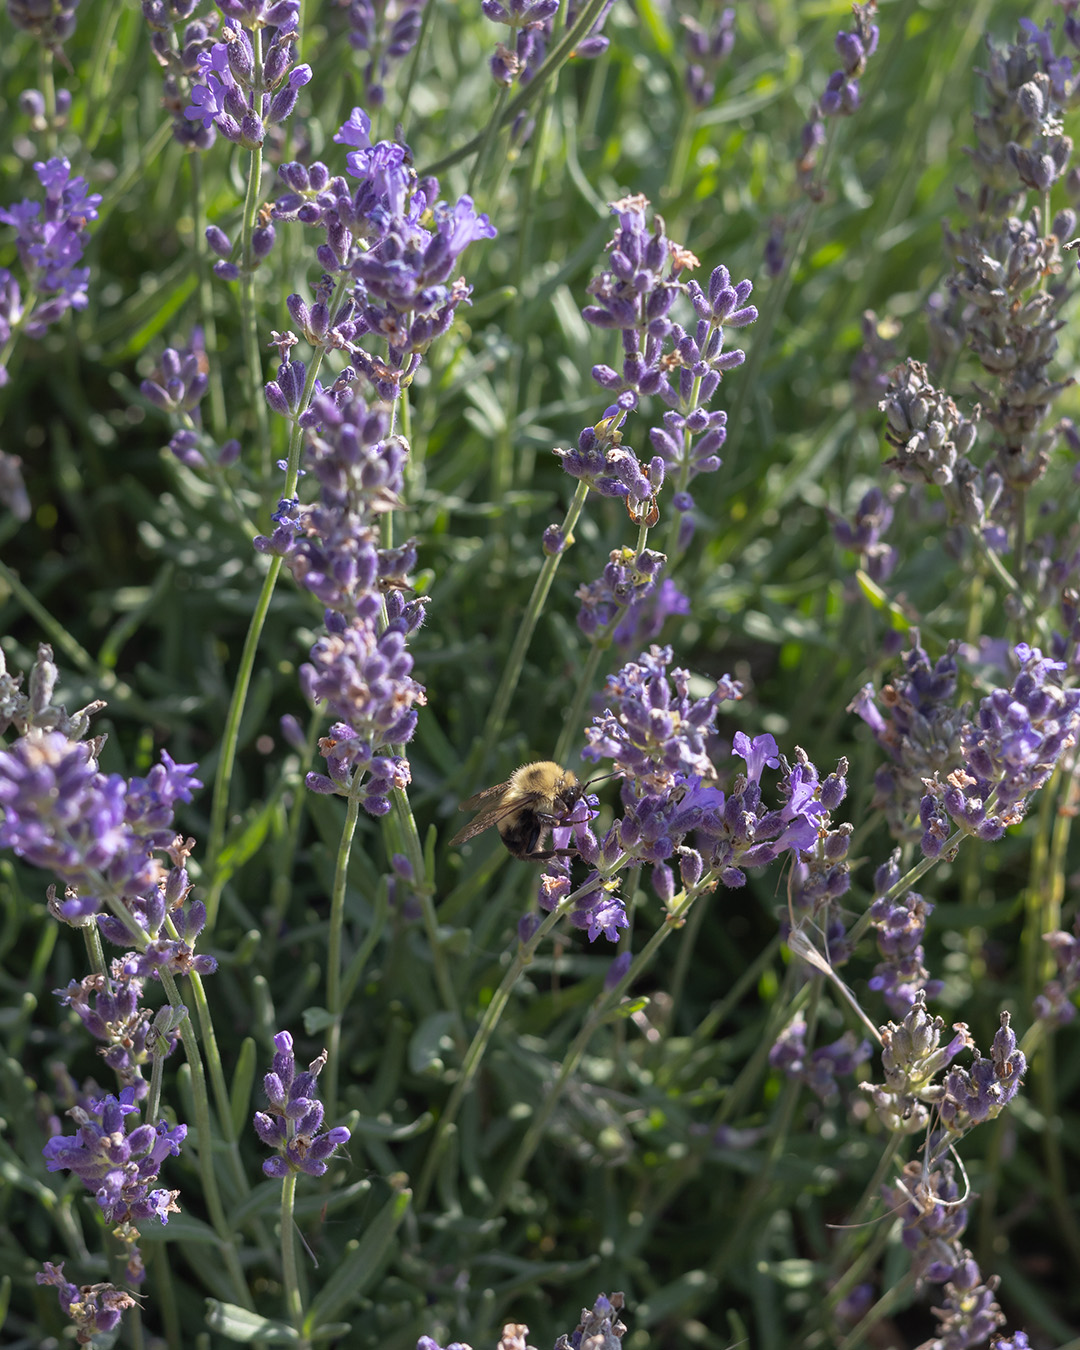 A bee enjoying some mid-summer lavender.